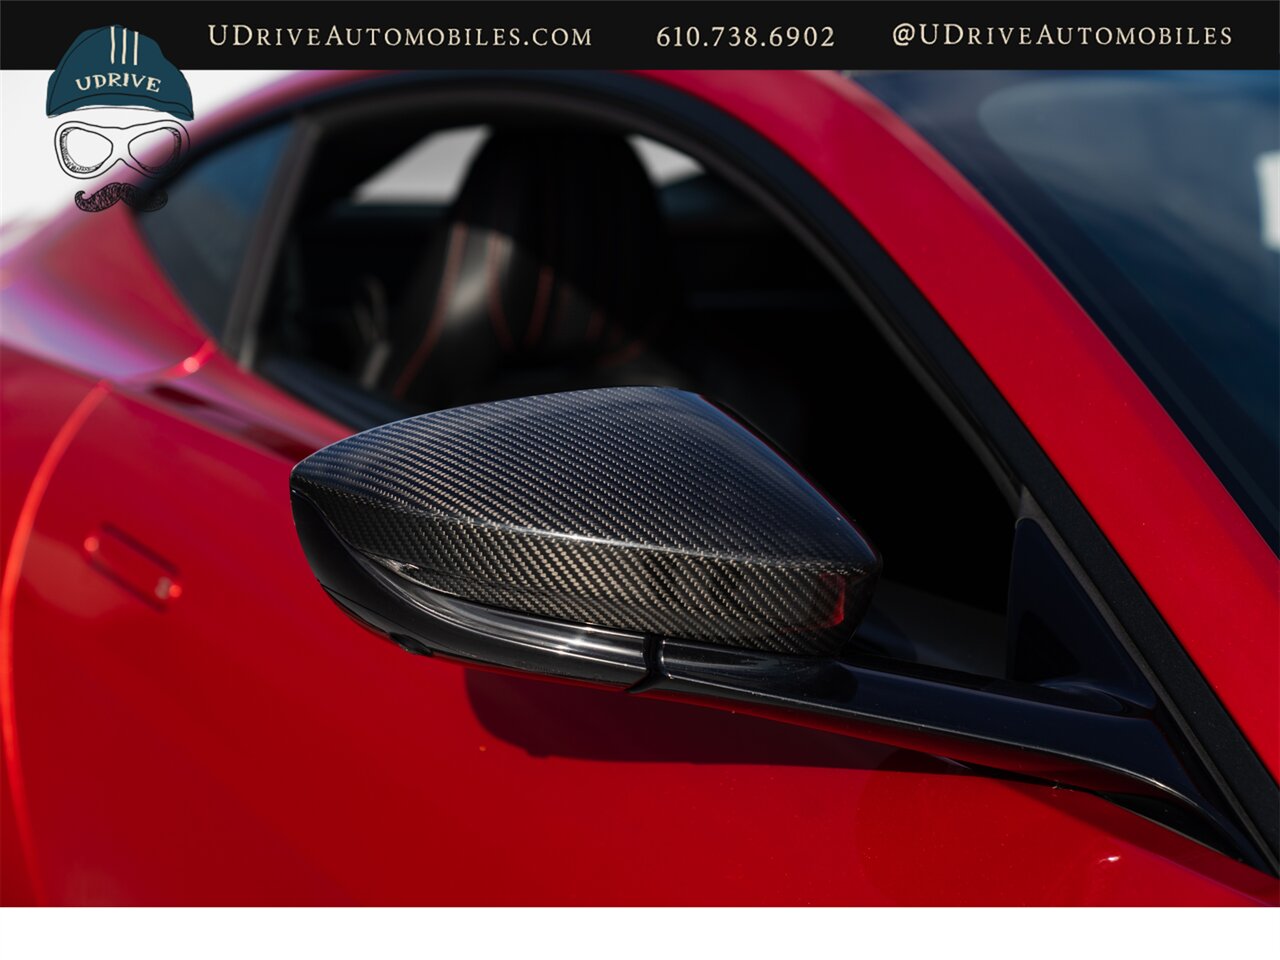 2019 Aston Martin Vantage  Incredibly Spec Rare Q Exclusive Fiamma Red $222k MSRP 1 of a Kind CPO - Photo 19 - West Chester, PA 19382